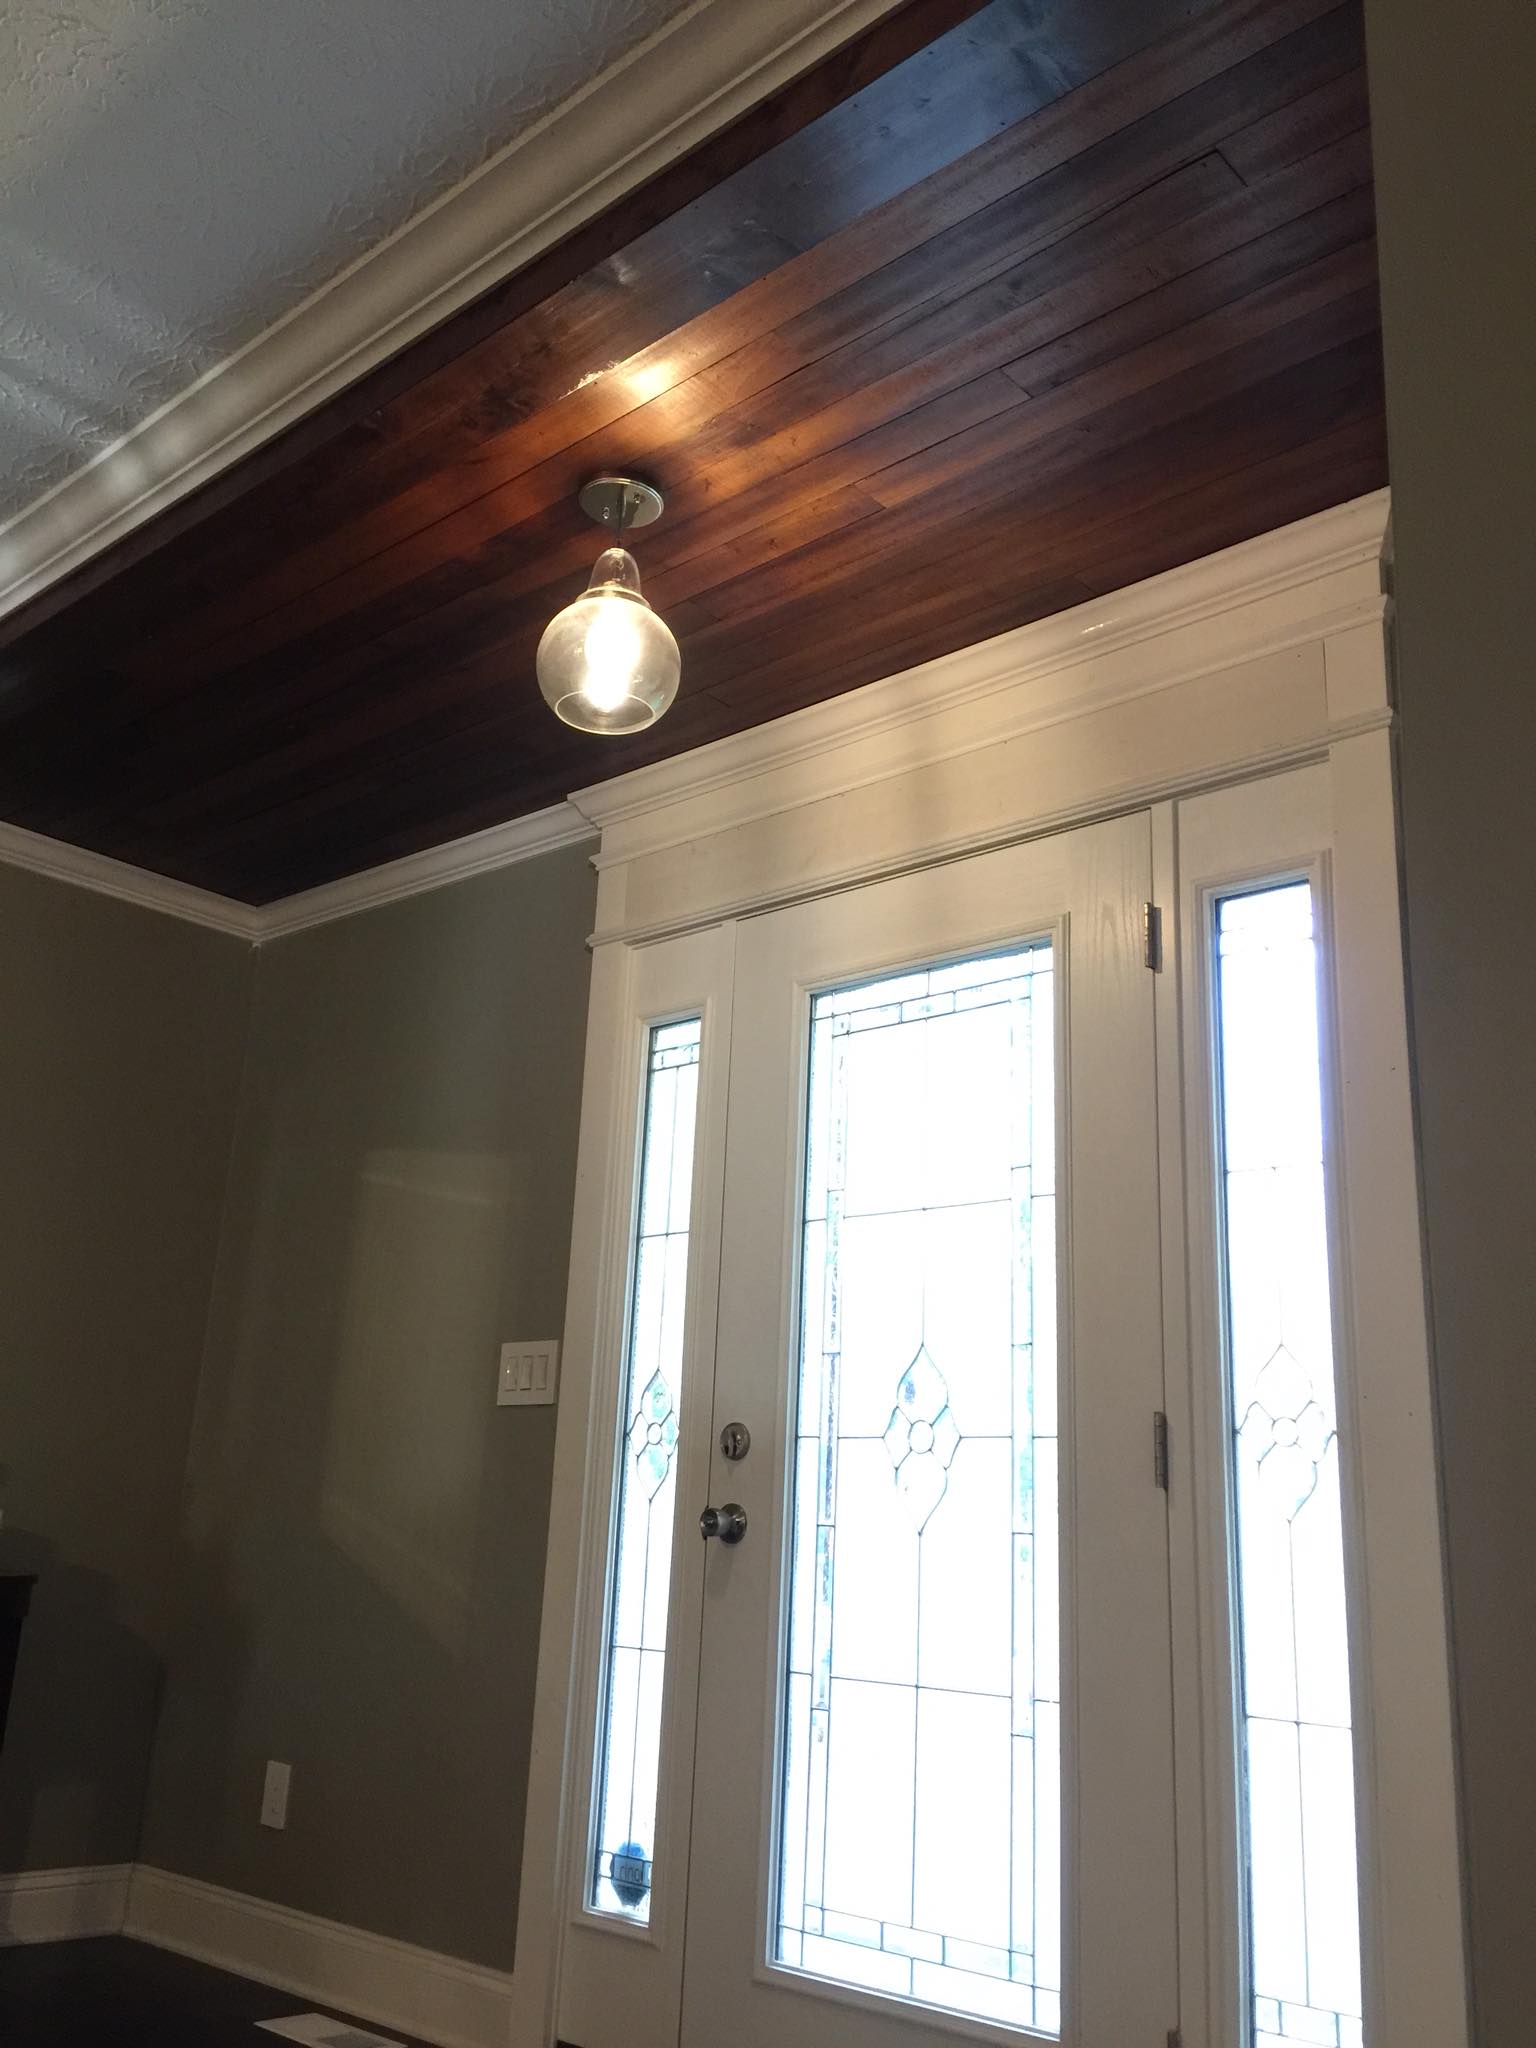 1900s Reclaimed Wood Planks installed on Ceiling and Stained